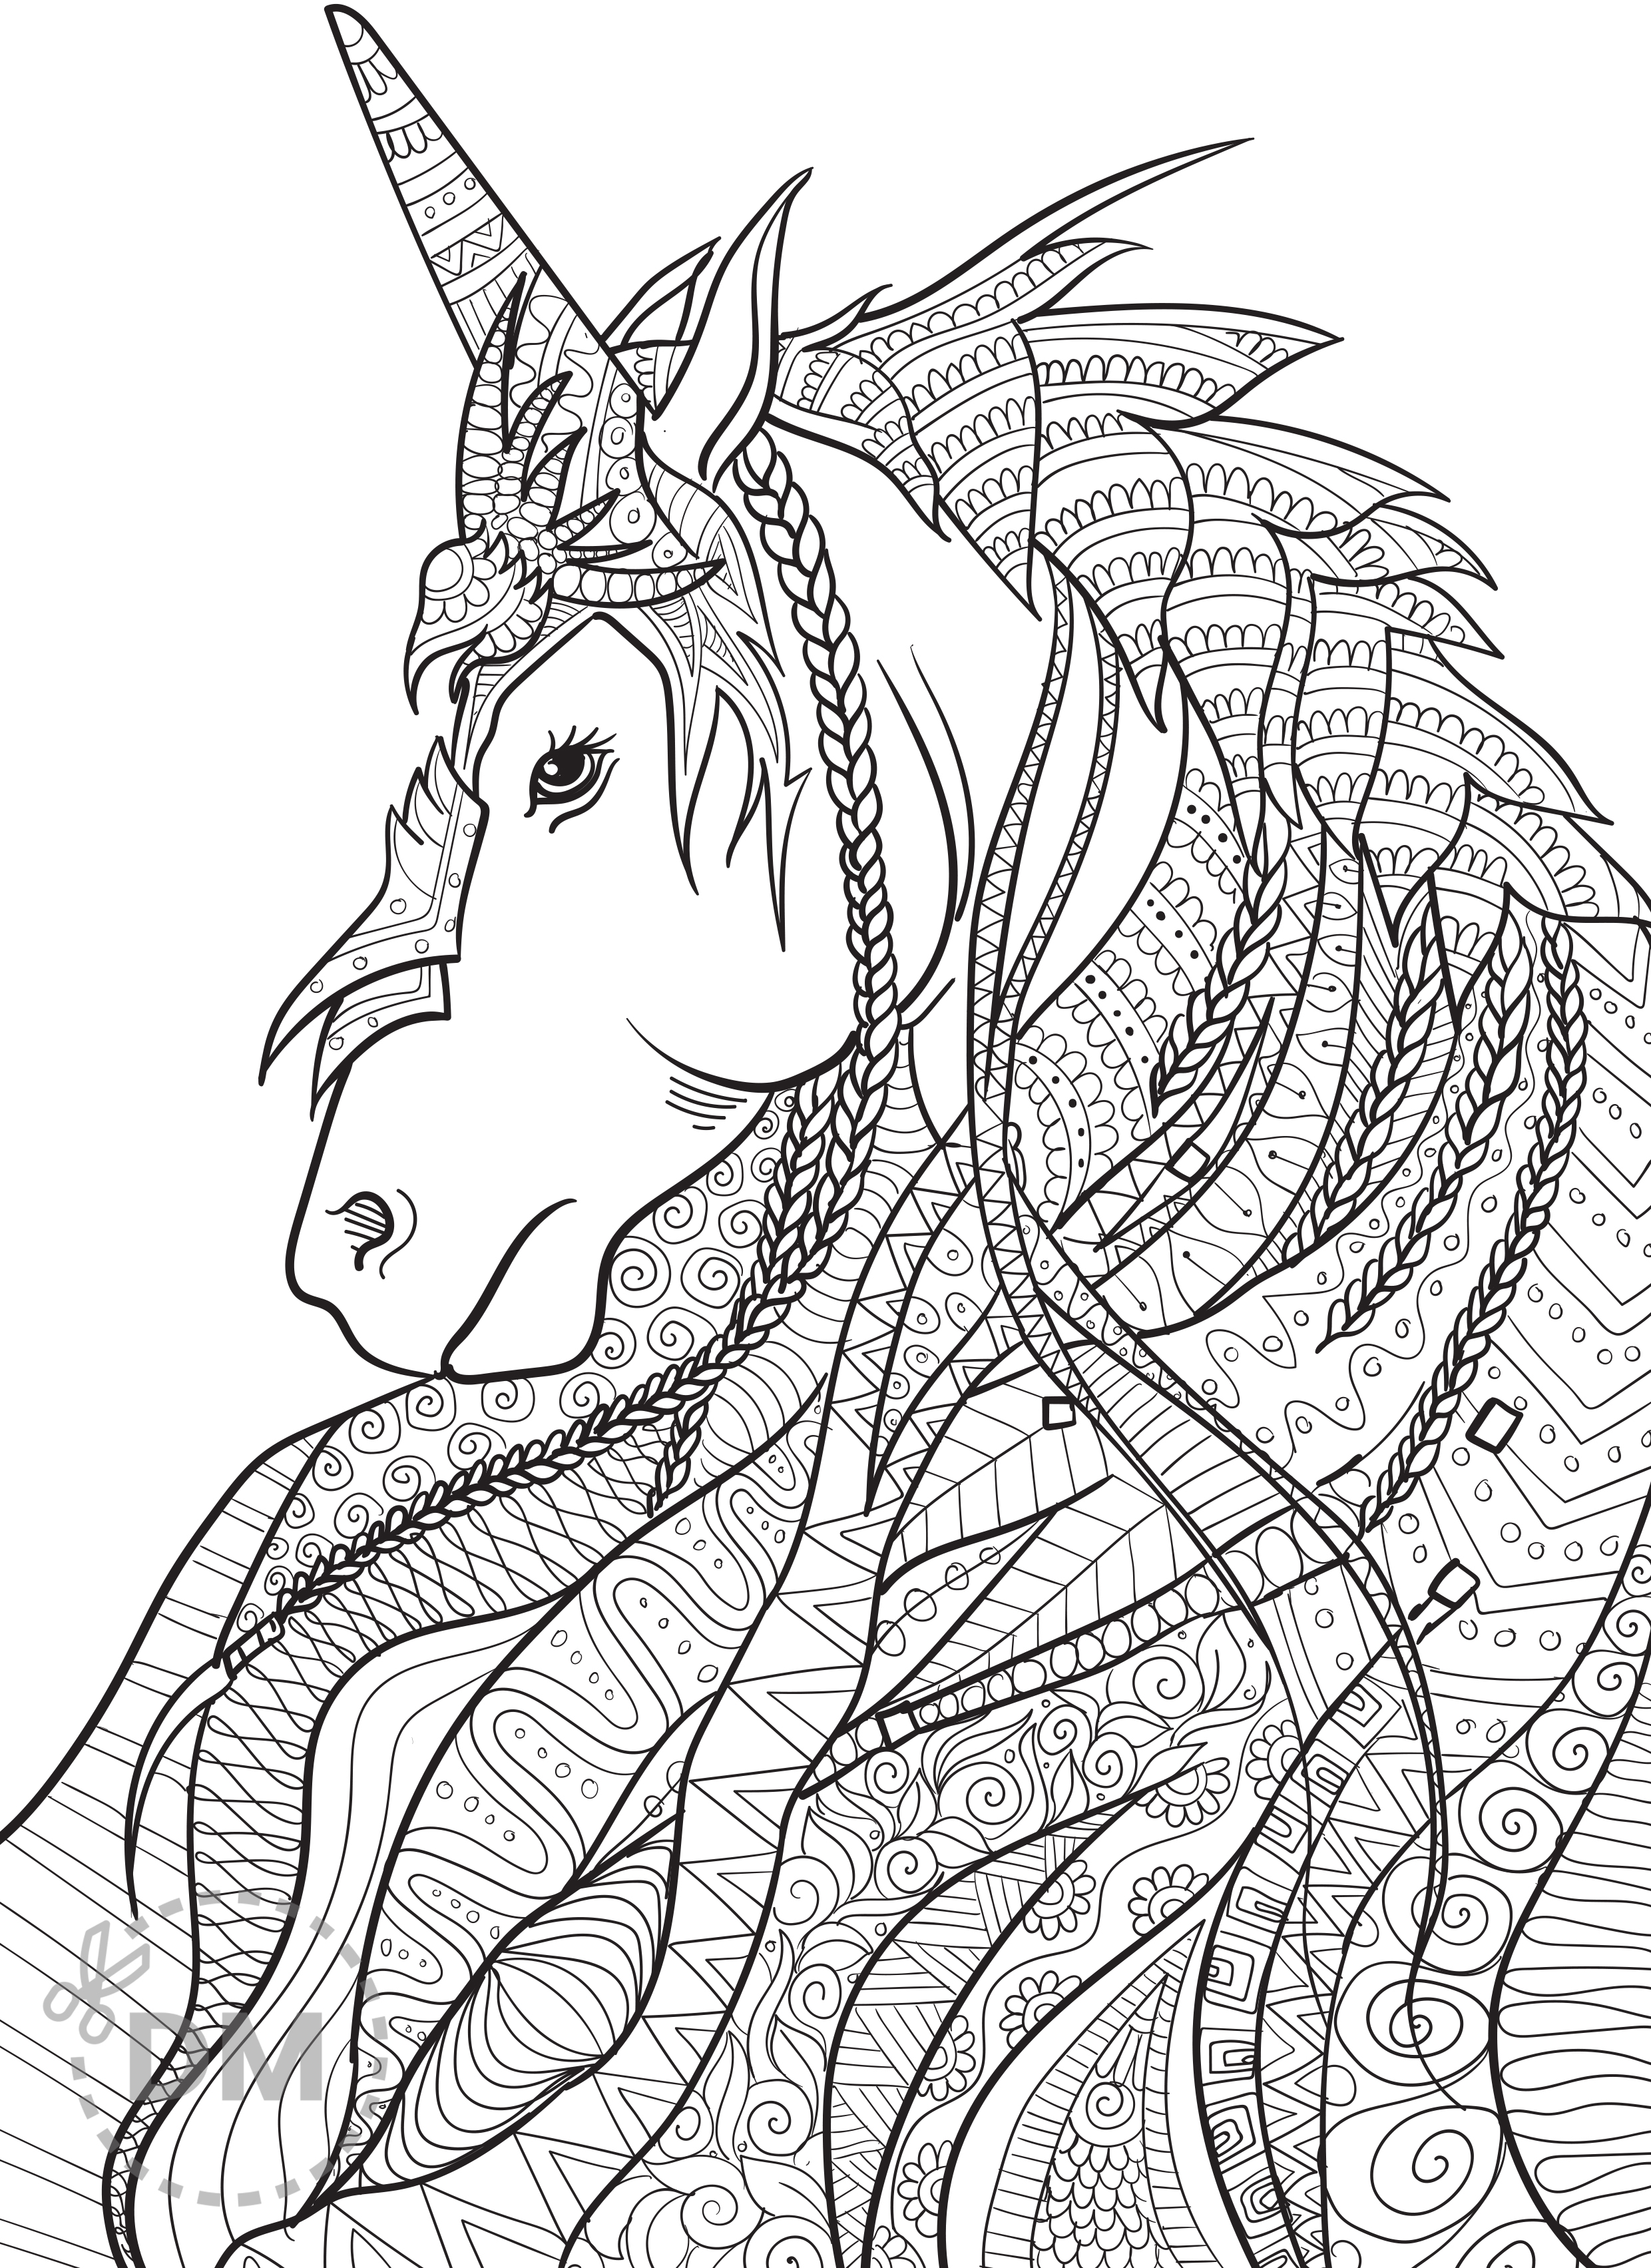 Unicorn Easter Coloring Page For Kids to Color For Free   diy ...